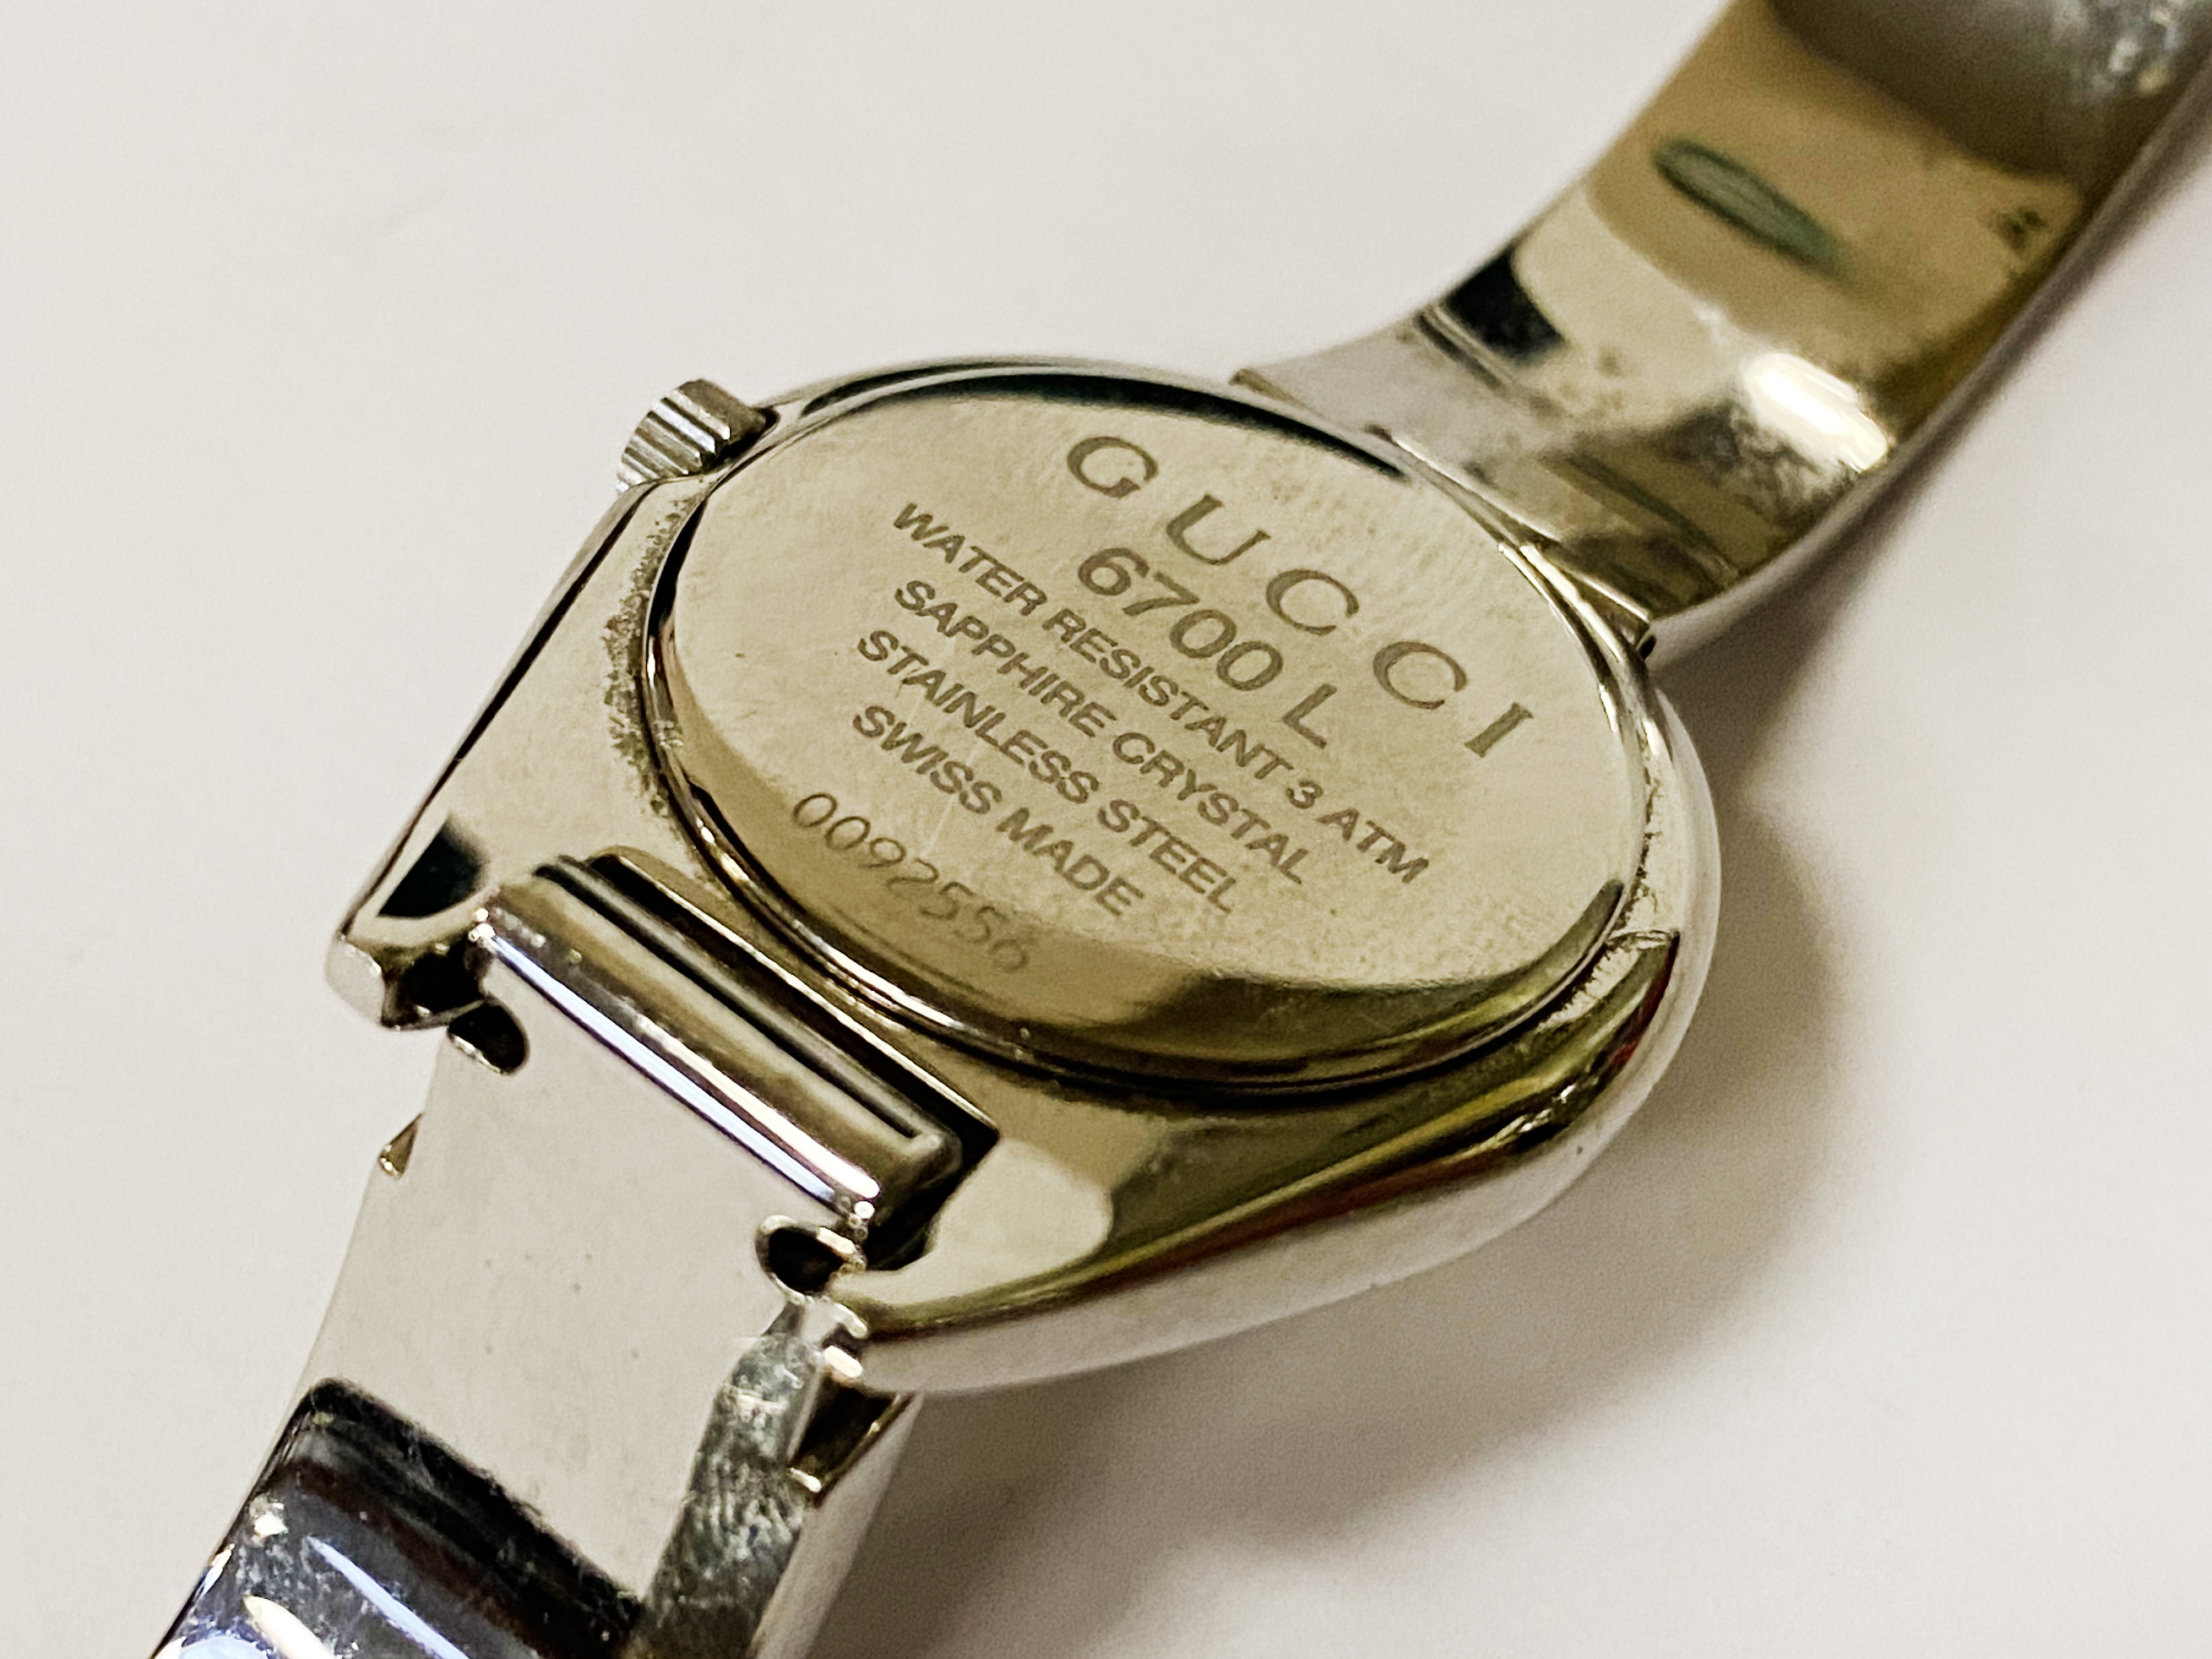 GUCCI STAINLESS STEEL LADIES WATCH - Image 3 of 3